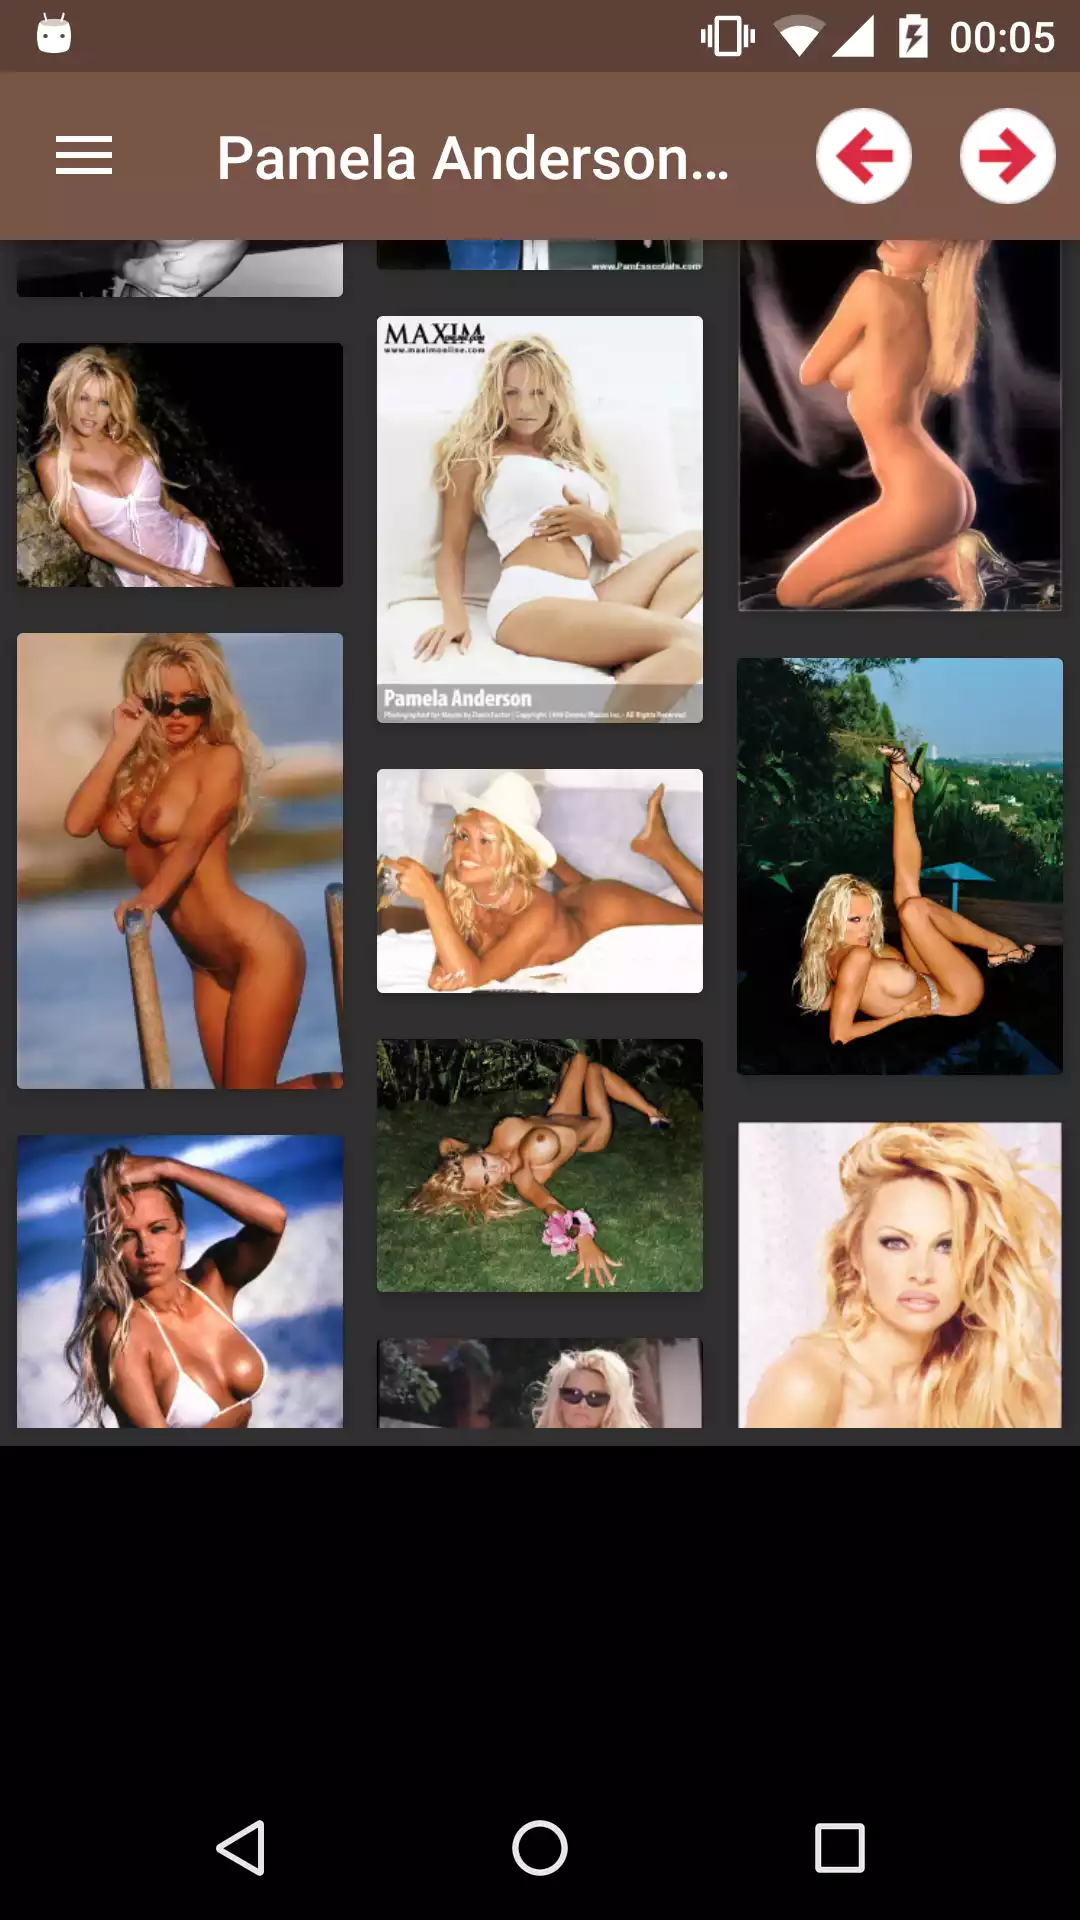 Pamela Anderson backgrounds topless,henti,photos,hntai,android,comicses,anderson,wallpaper,apk,erotic,cuckhold,mythras,pornstar,hentai,anime,backgrounds,wallpapers,app,adult,sexy,apps,pics,lair,pic,lovely,porn,pamela